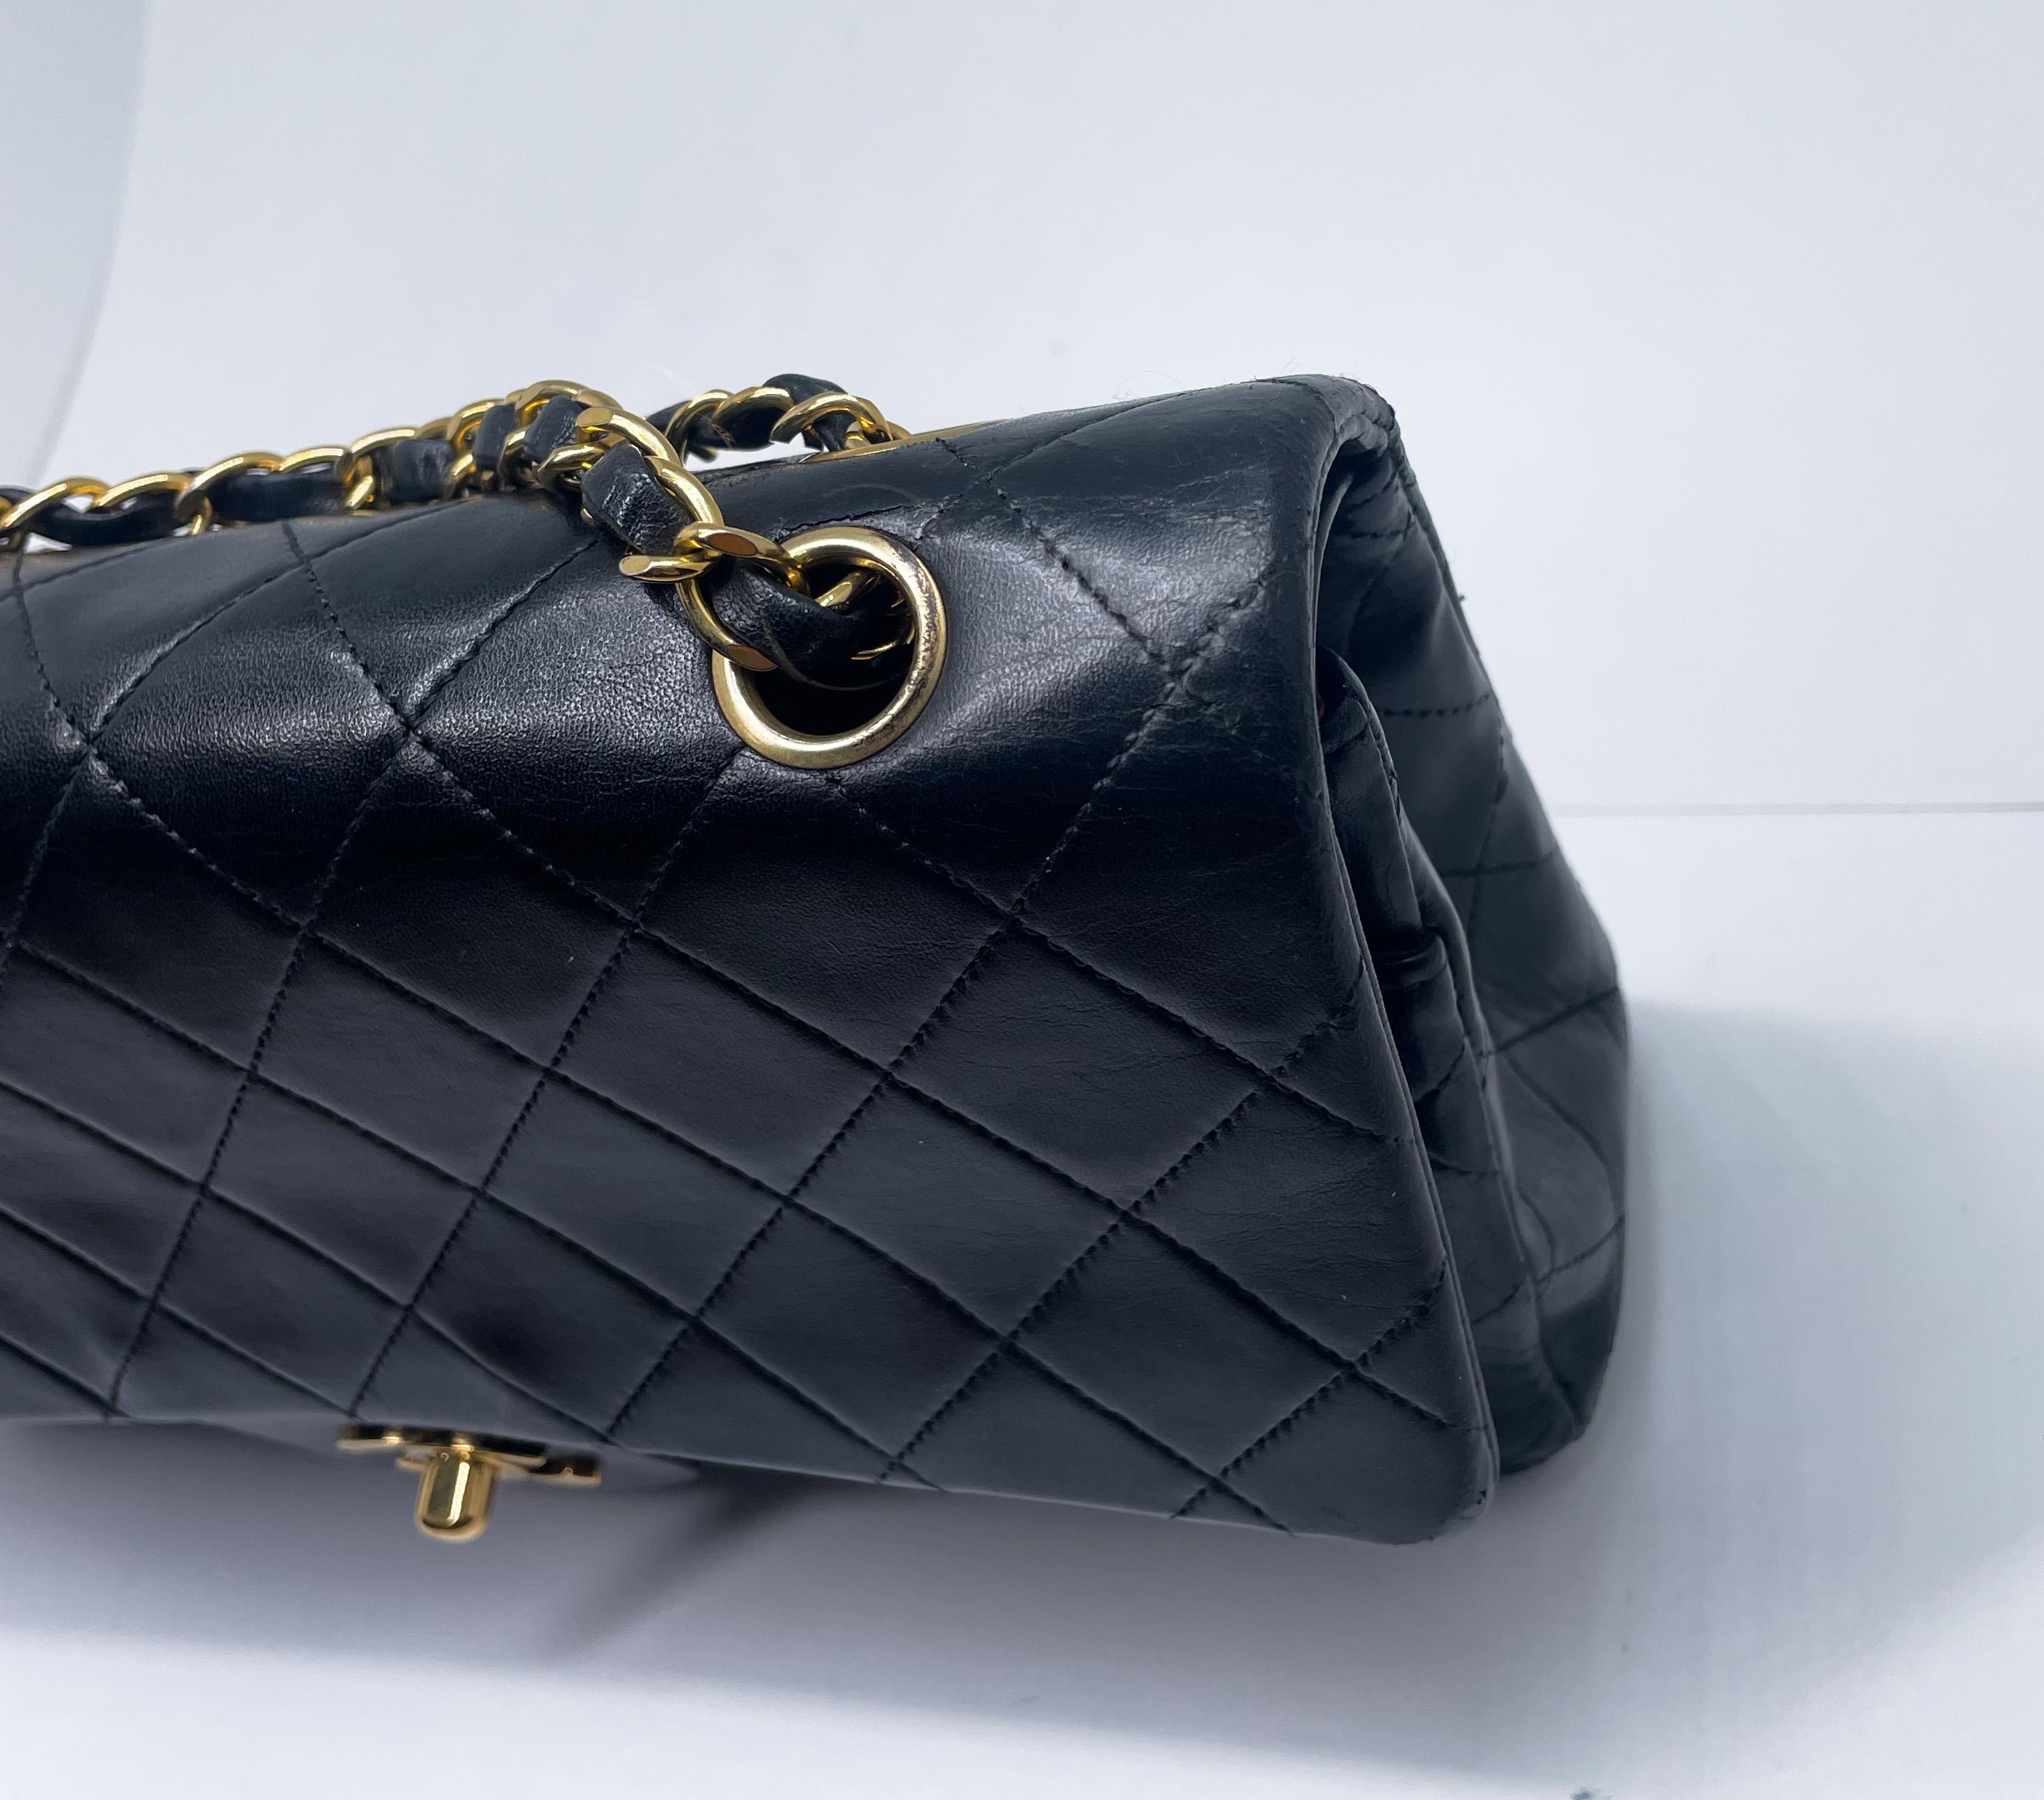 Chanel Classique handbag in black lambskin and 24-carat plated gold metal For Sale 5